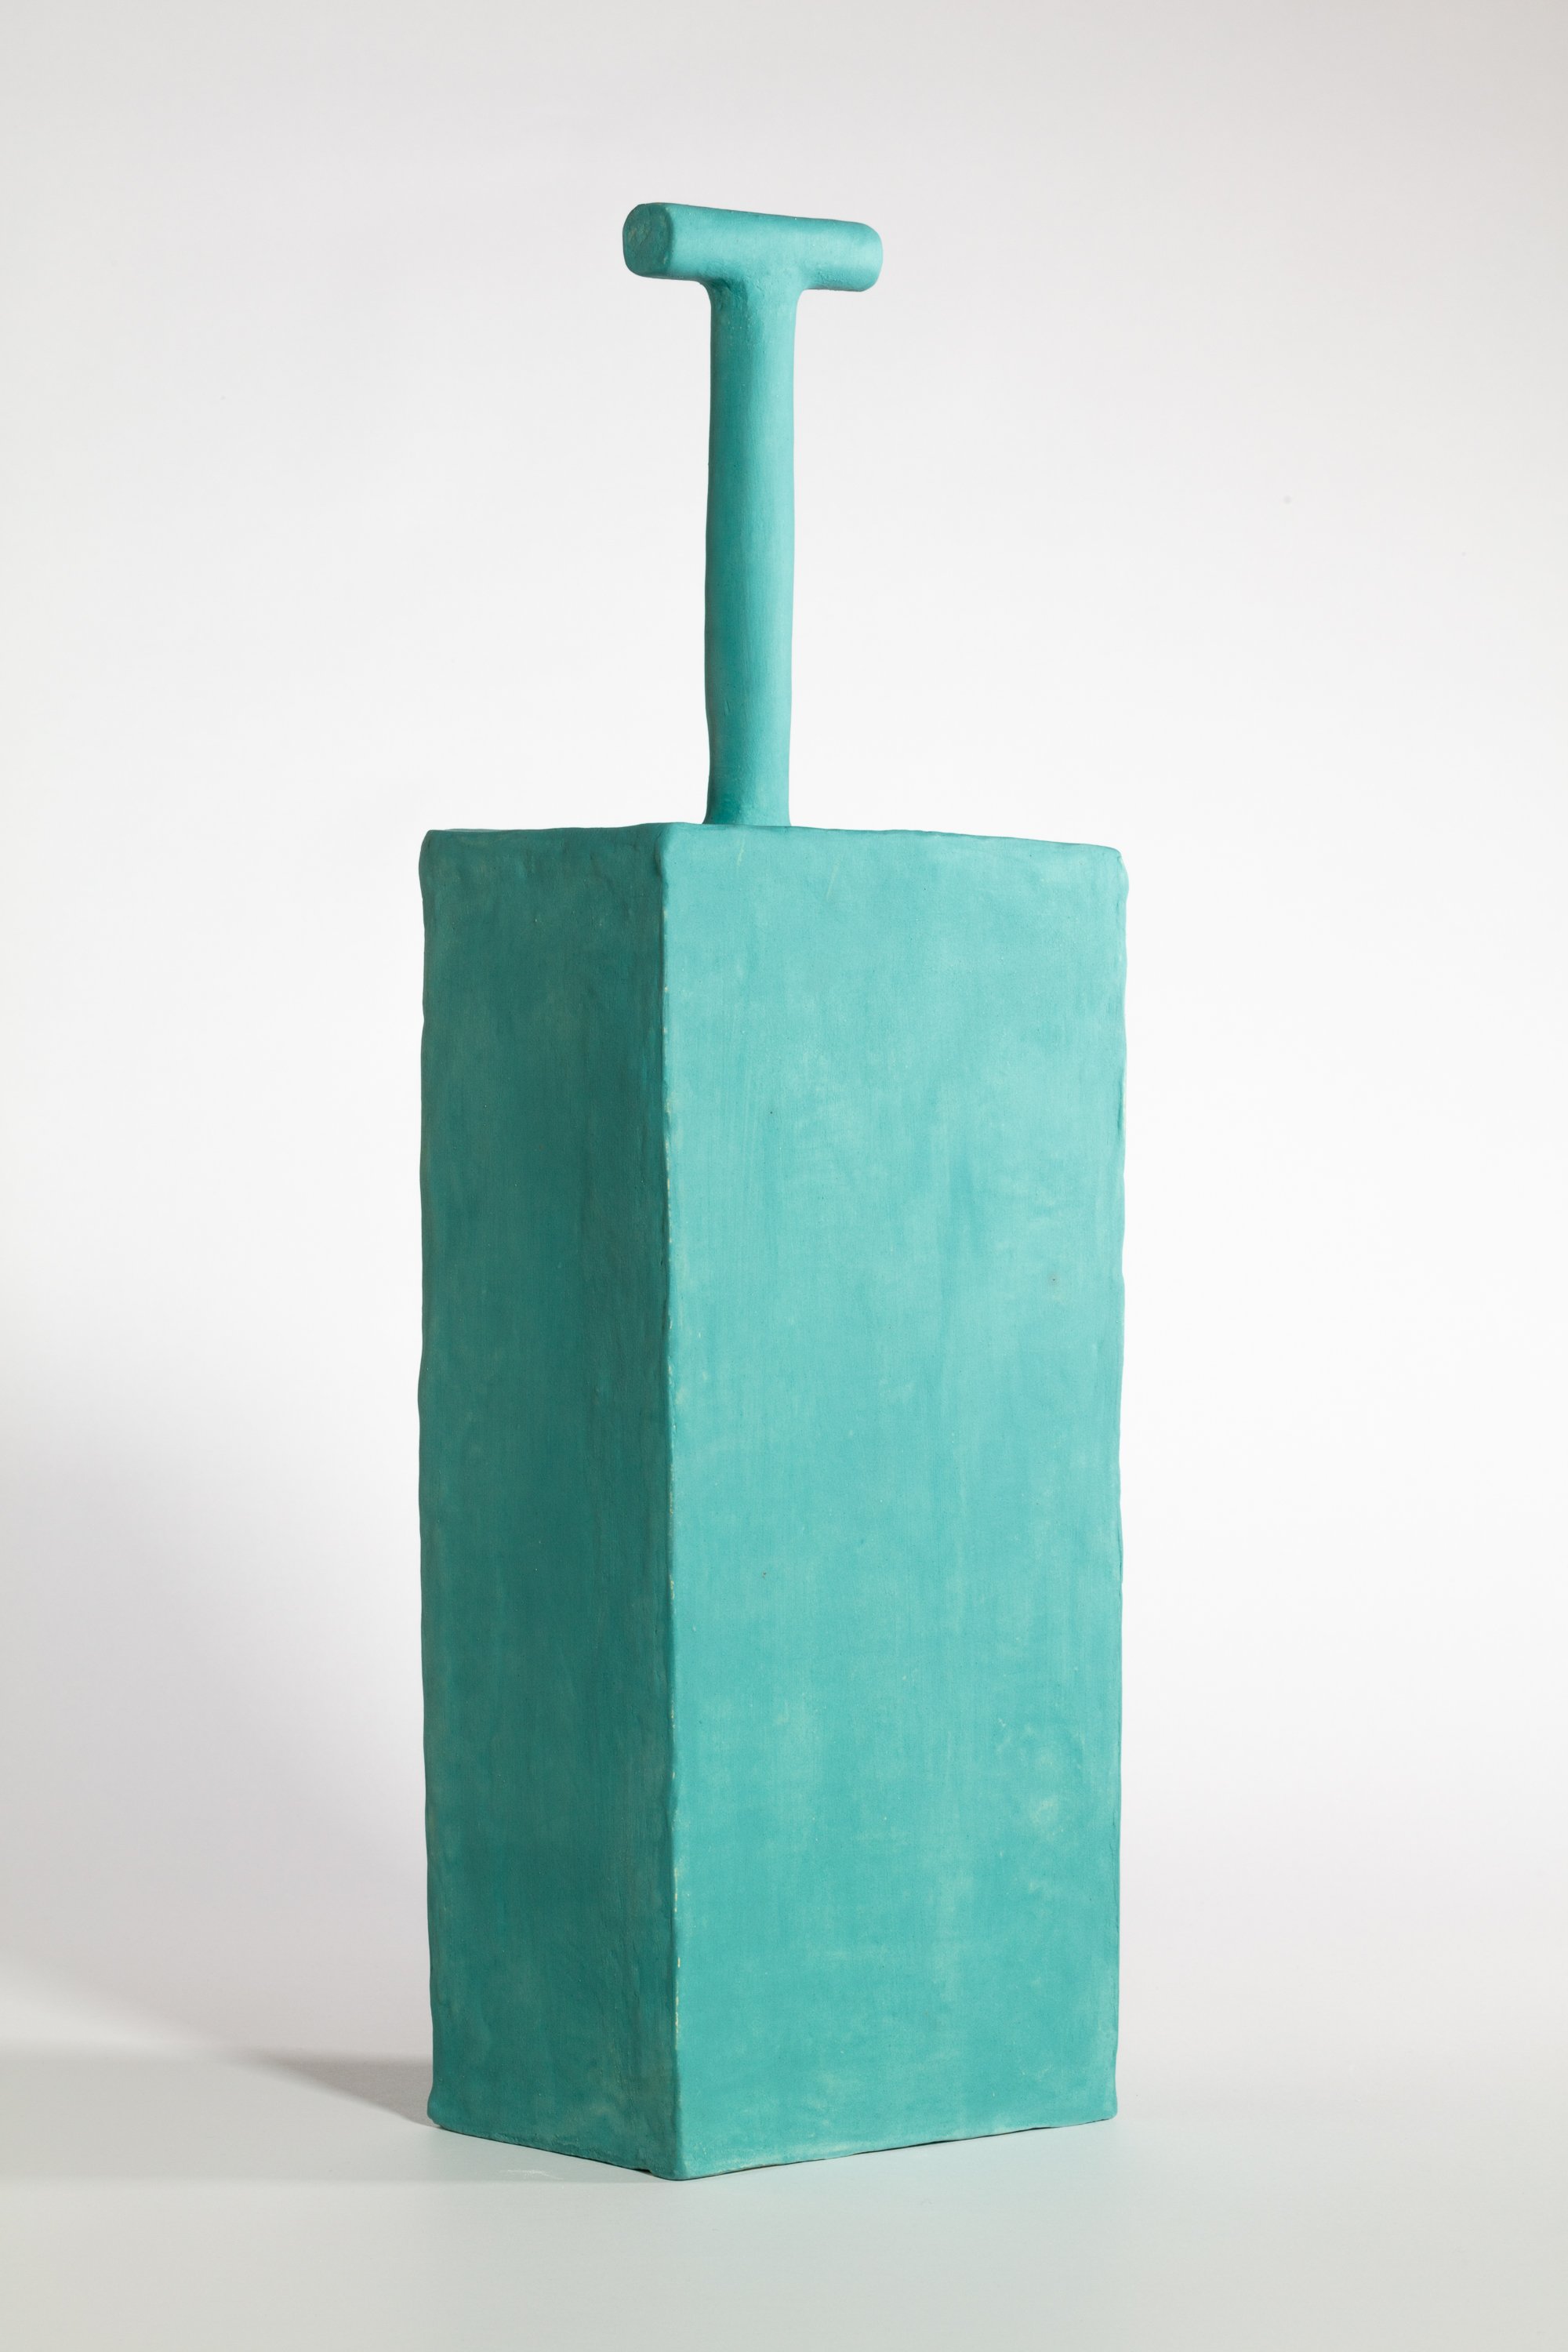   Richard Ibghy &amp; Marilou Lemmens,   The Great Reset , 2022. Ceramic, 20 x 6 x 4.5 in. 